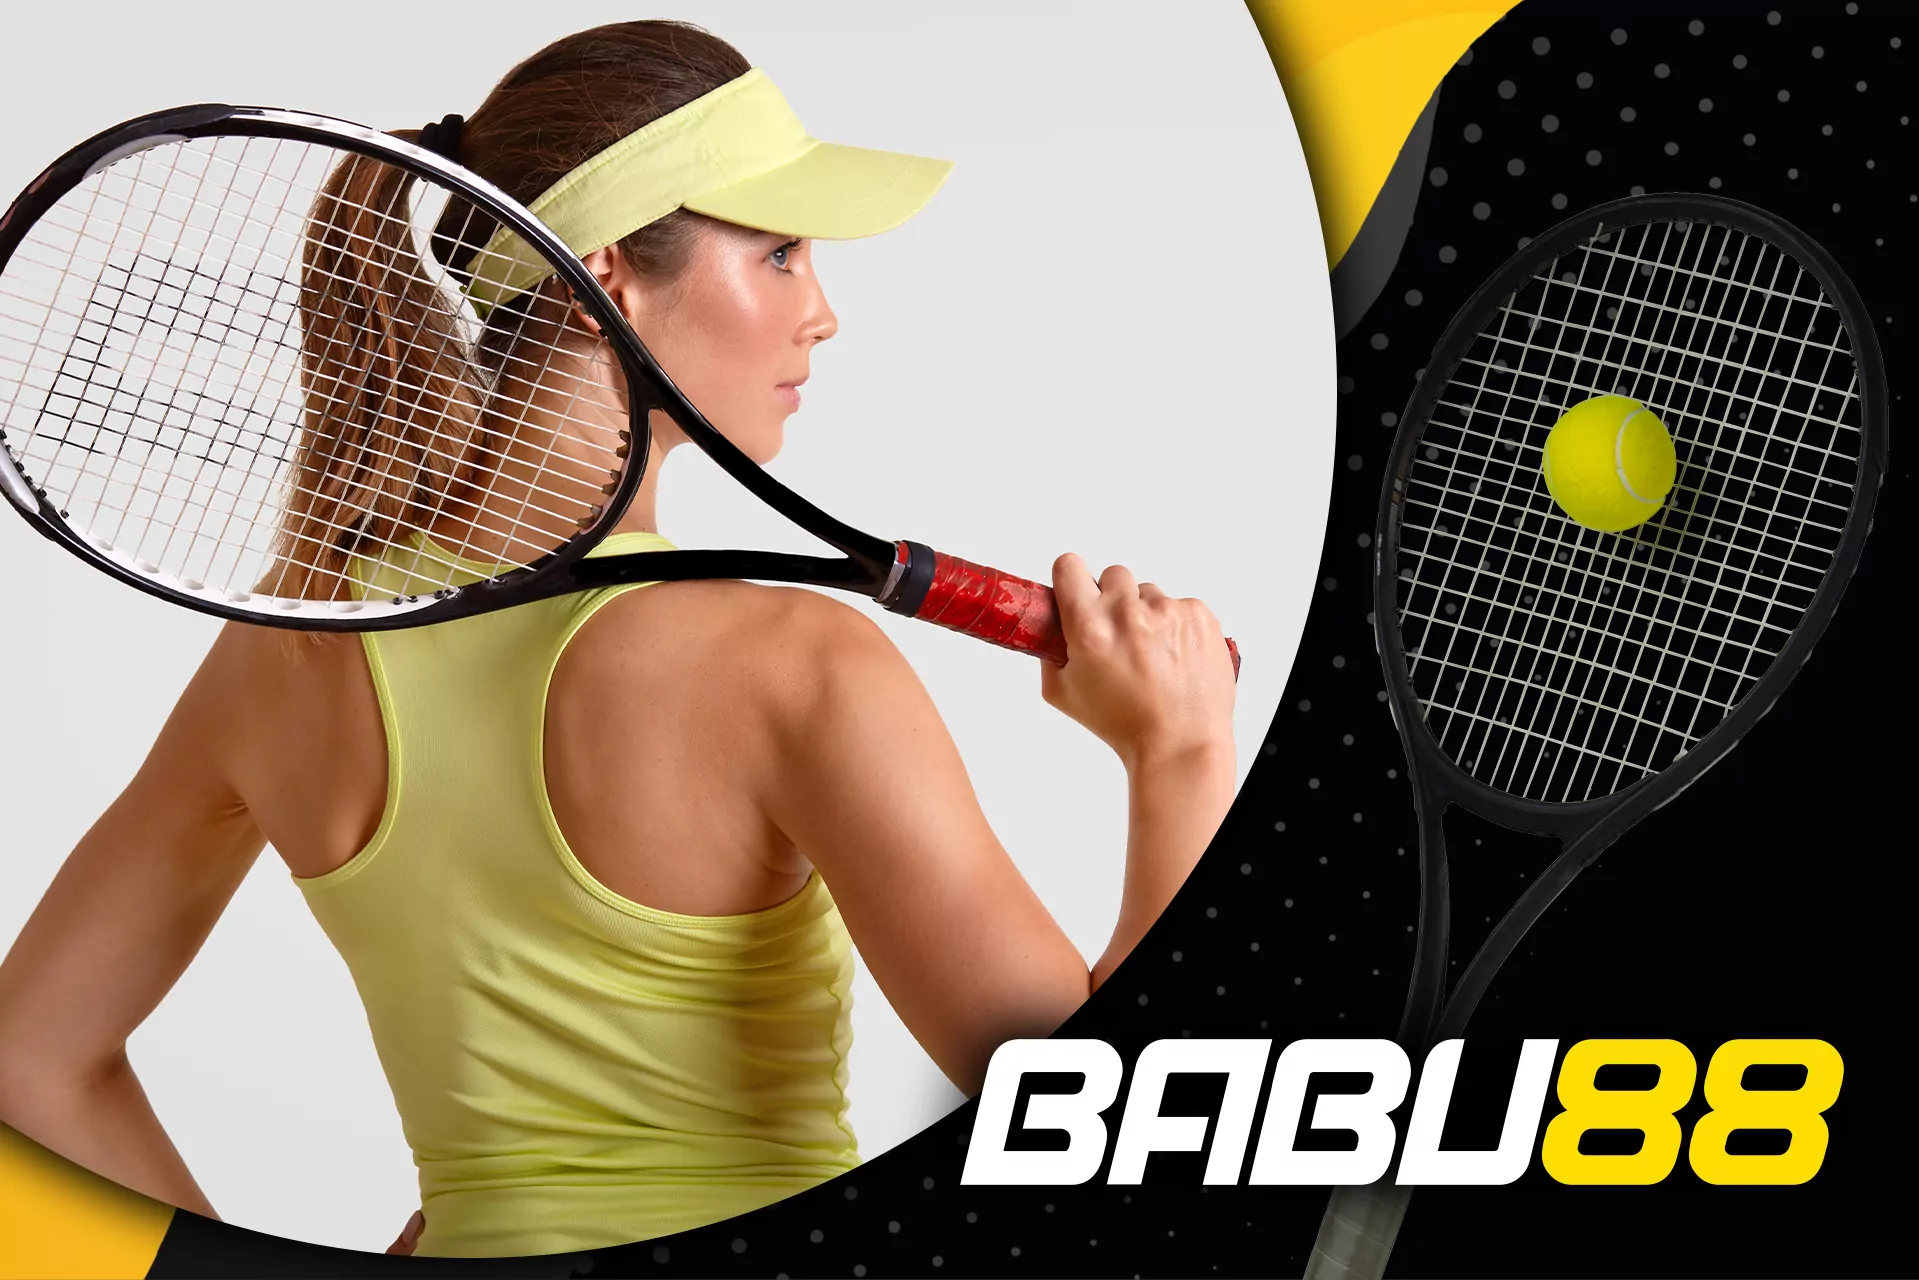 There are various betting markets on tennis in the Babu88 sportsbook.